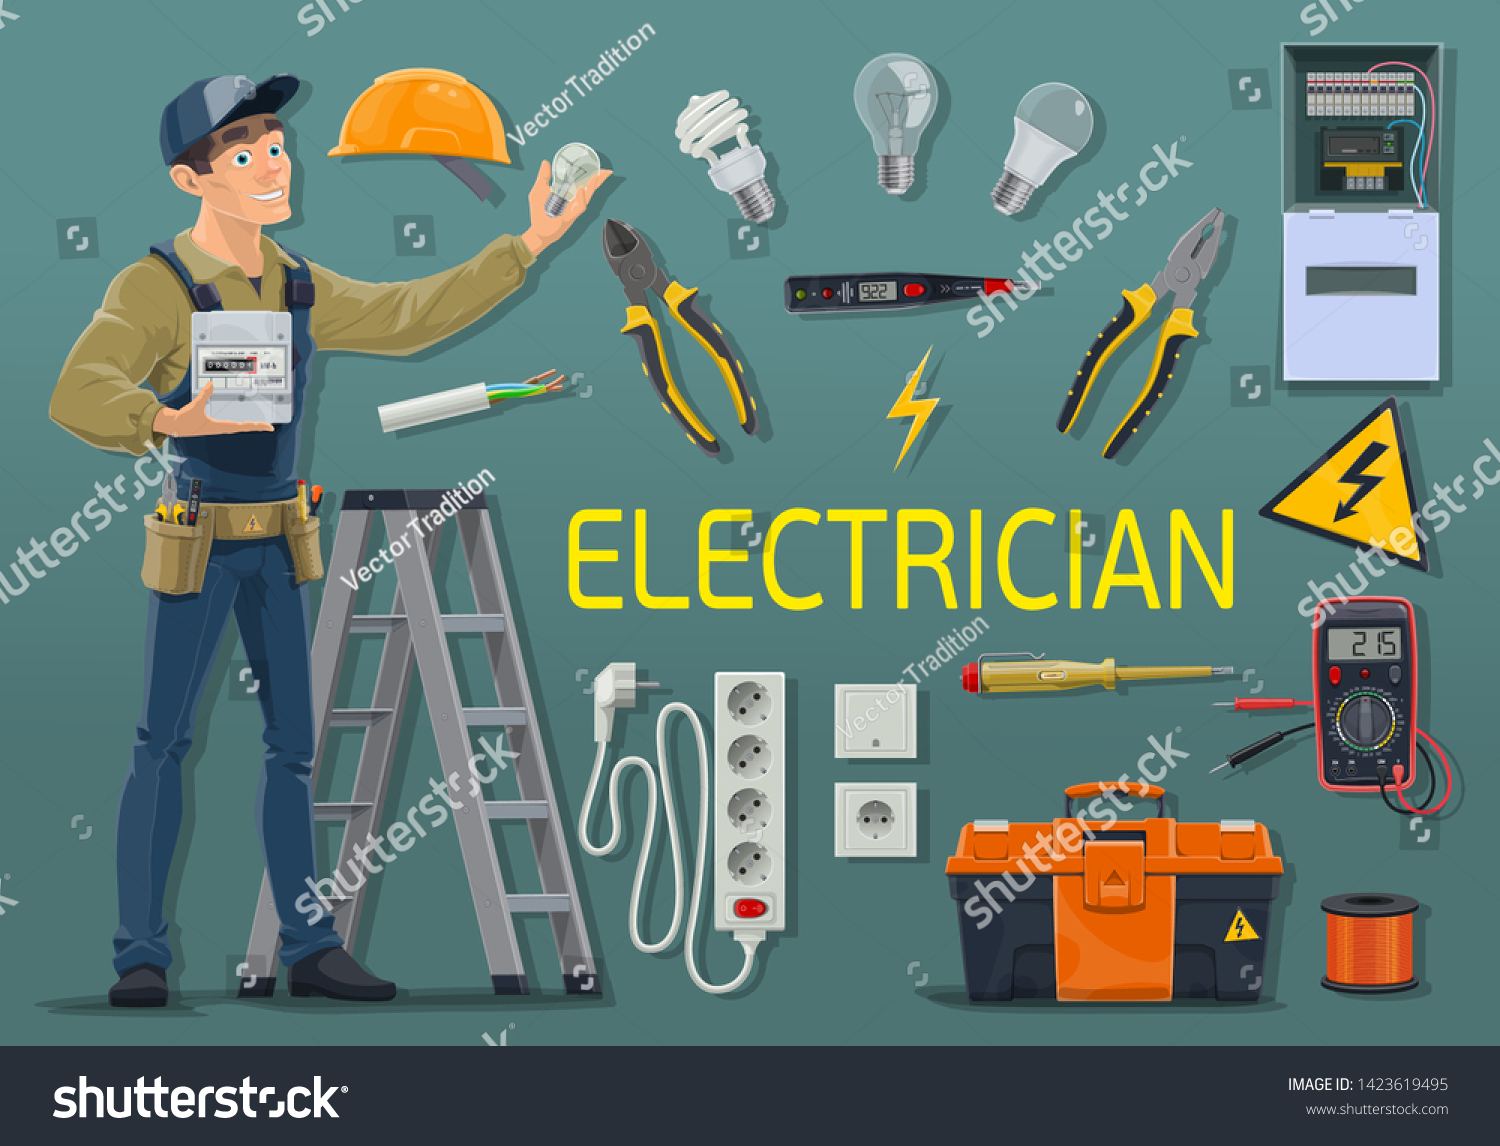 electrical tools and equipment